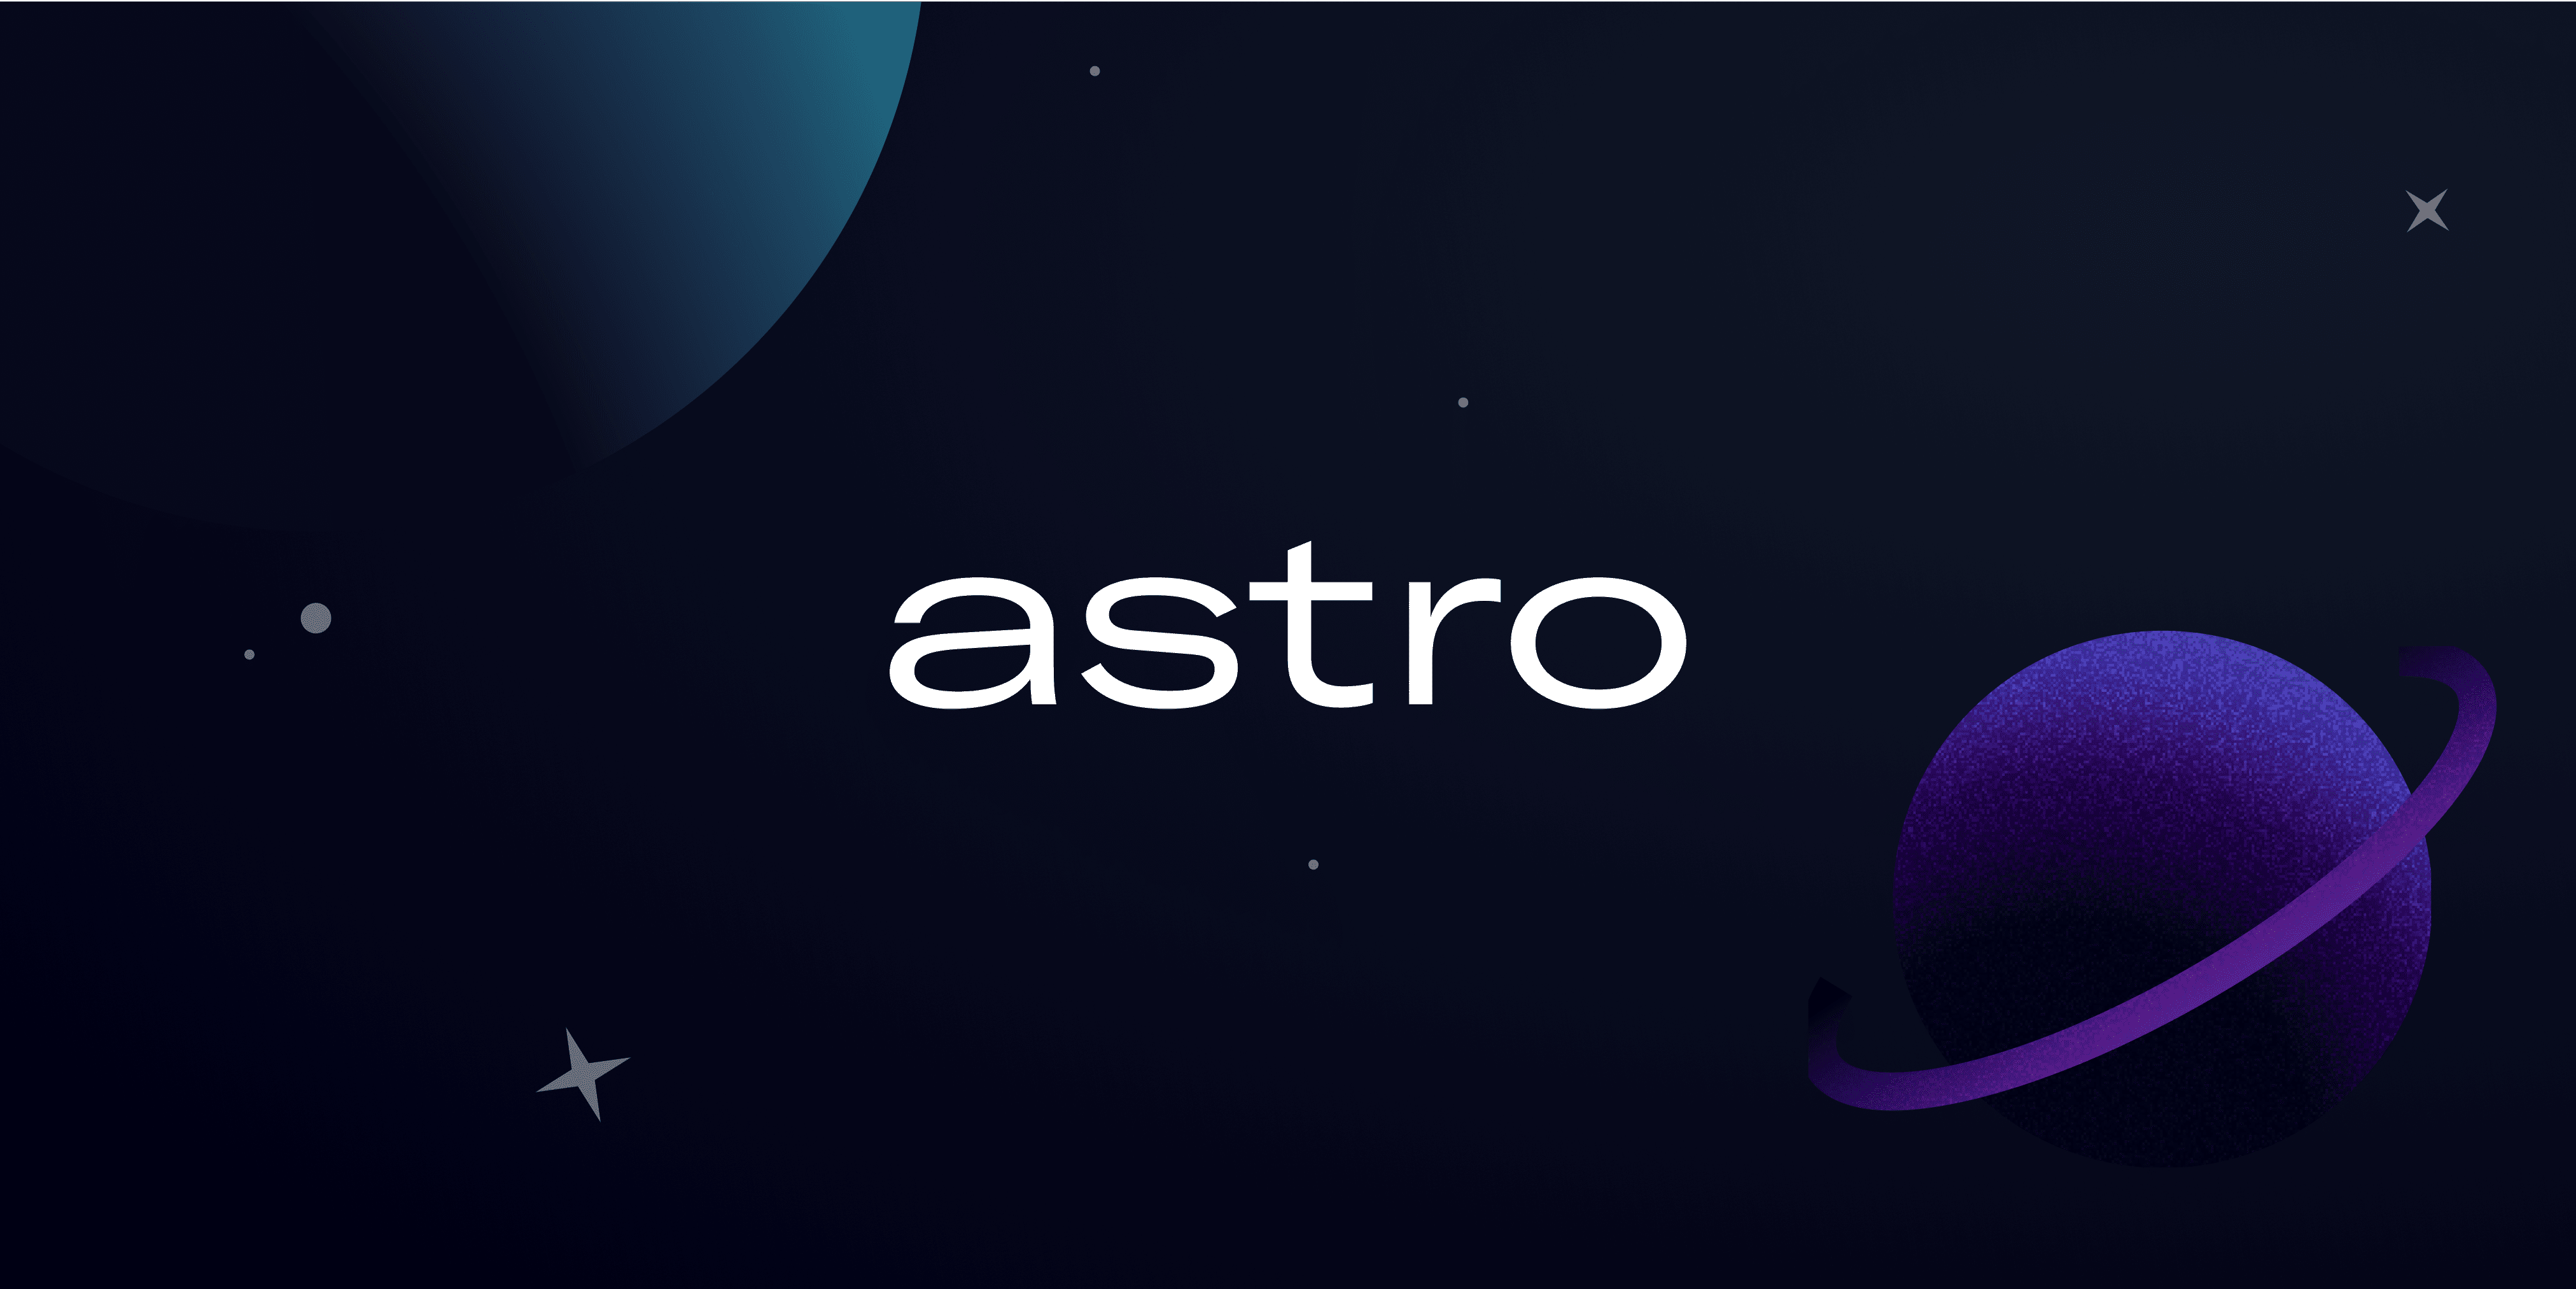 The word astro against an illustration of planets and stars.